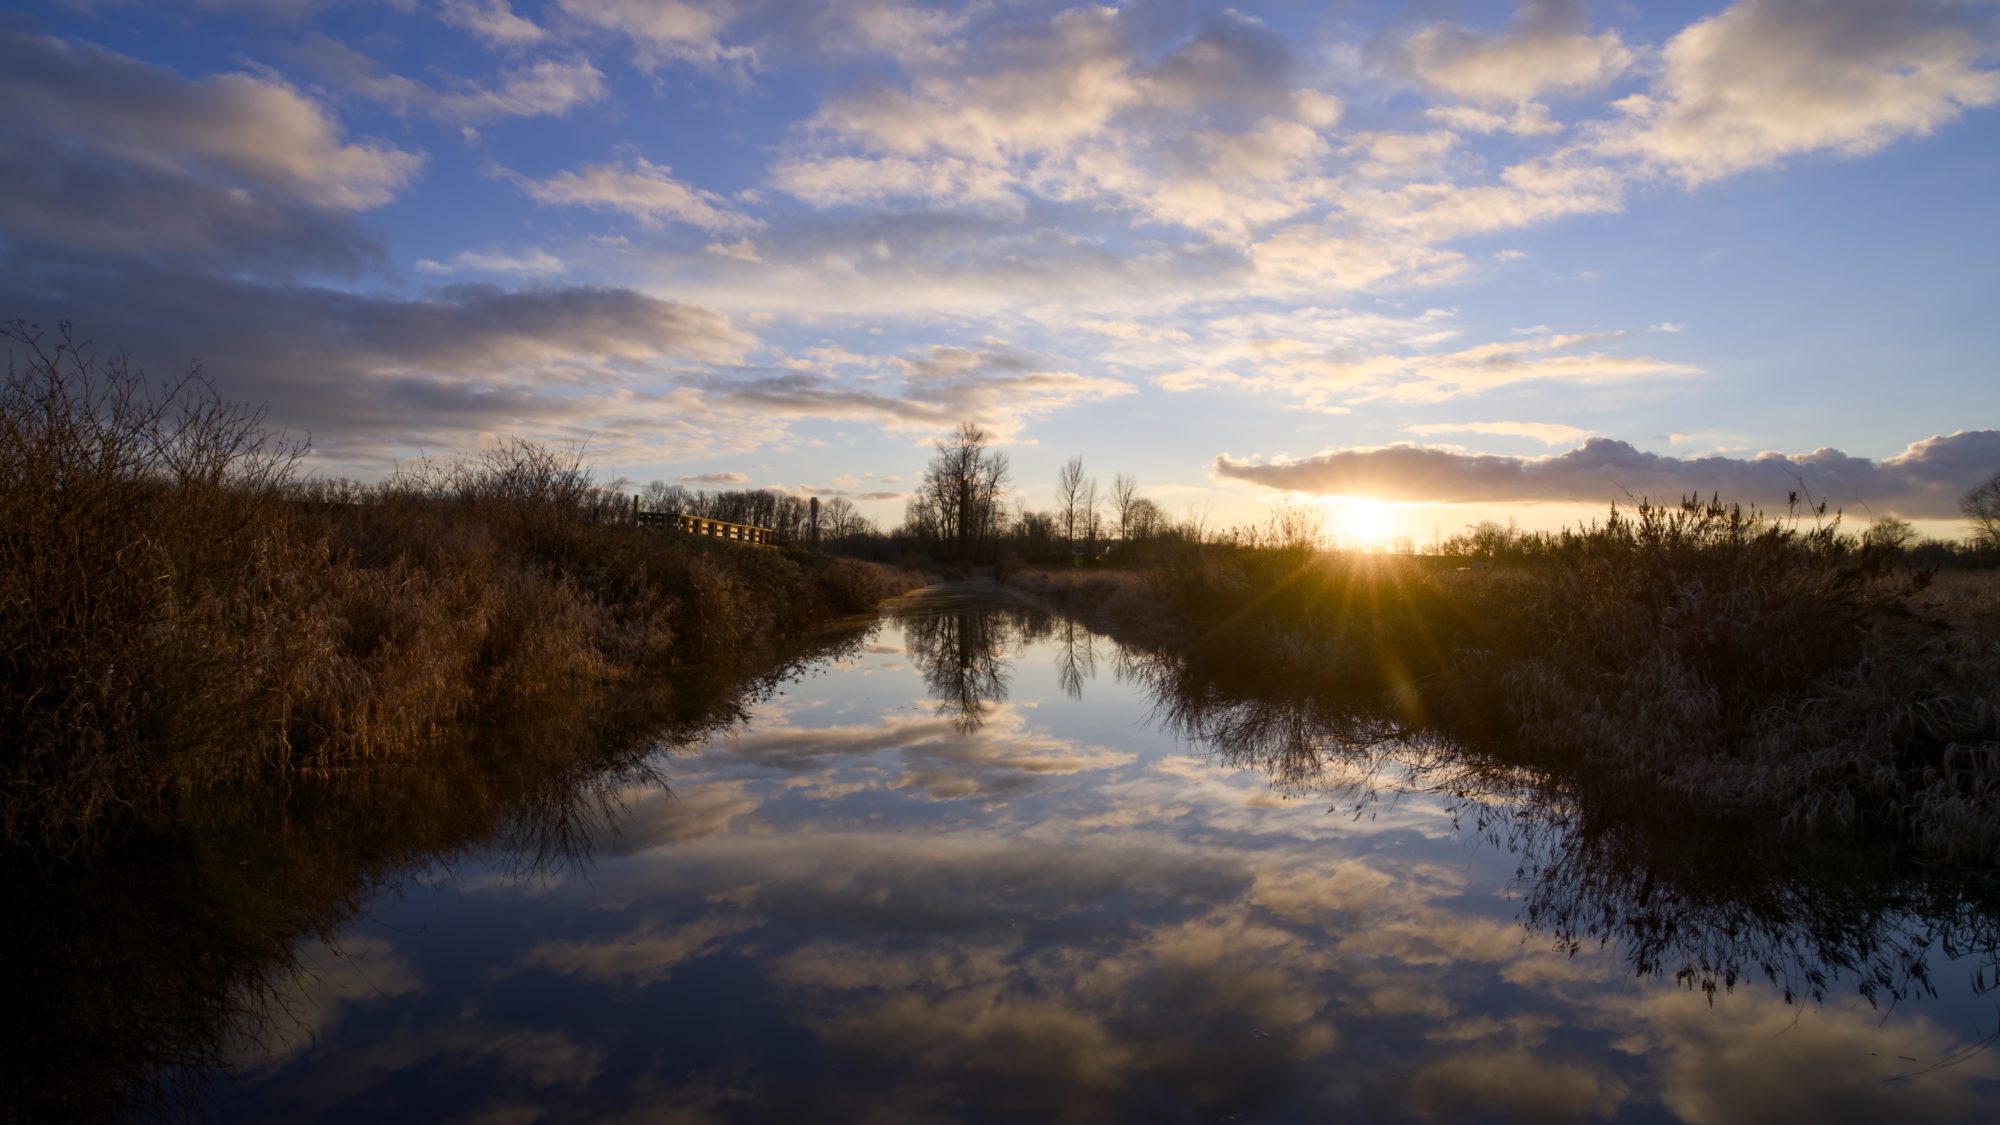 A sunset view along a small creek. The actual sun is just barely visible above the horizon, and the sky is a rich deep blue with a smattering of clouds